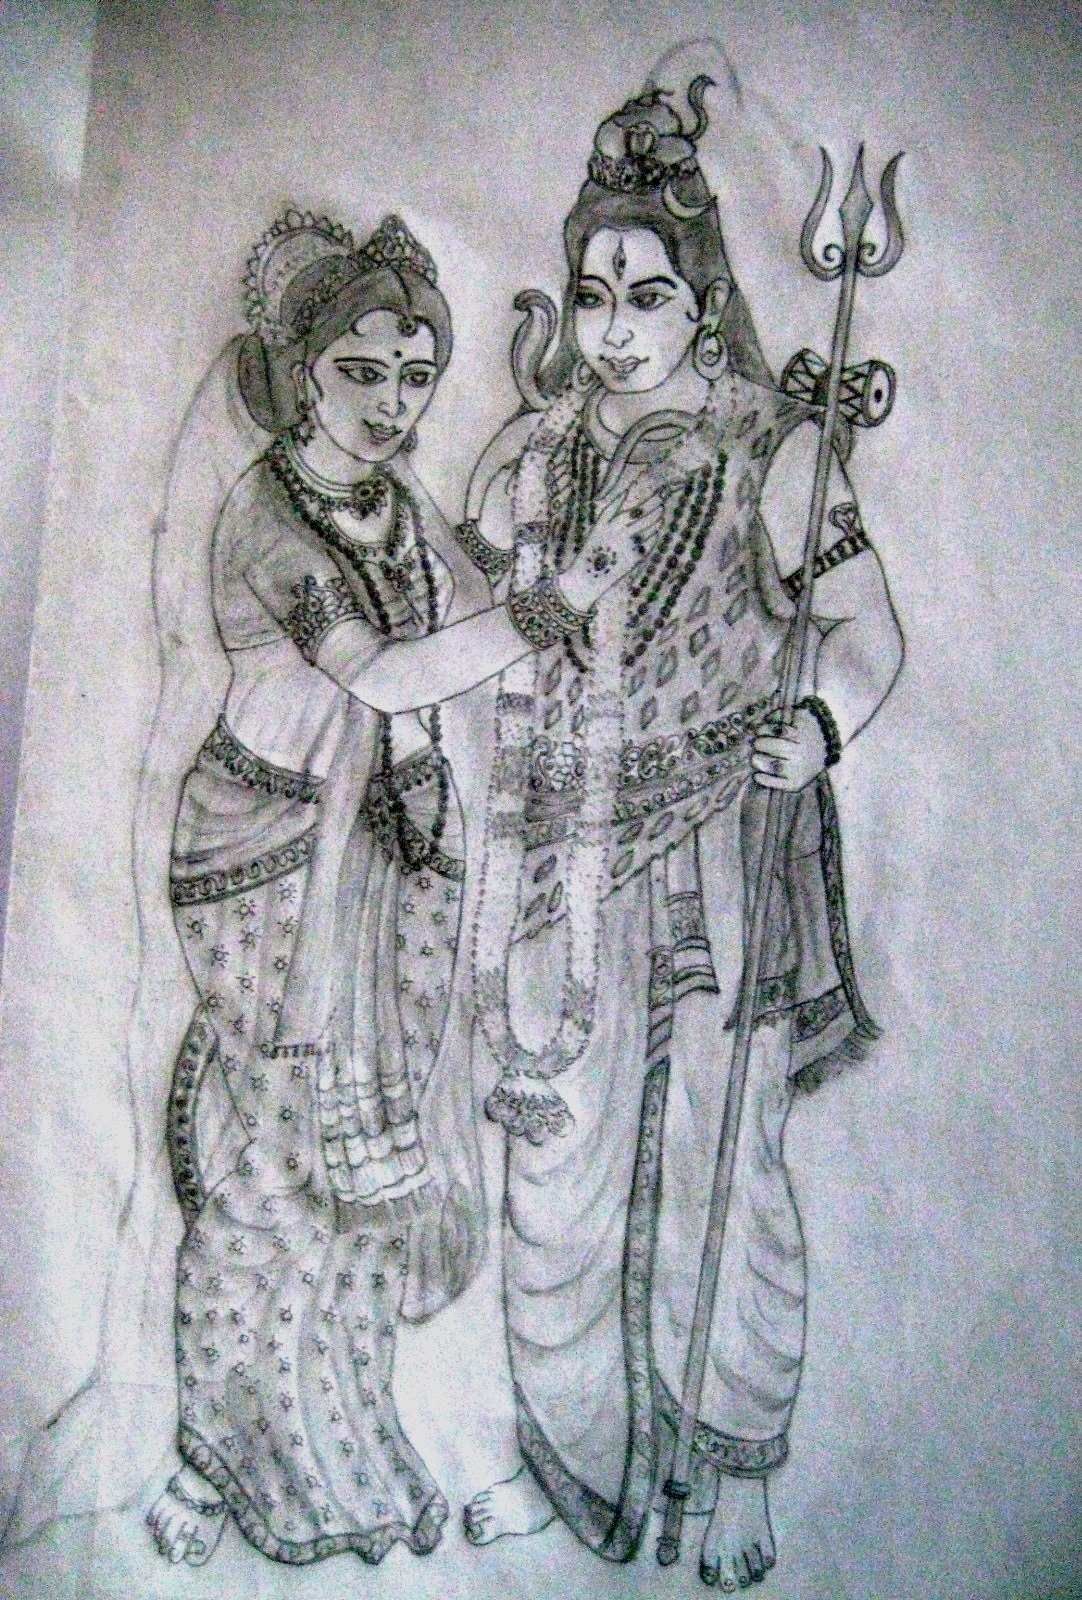 Shiva Sketch At Paintingvalley Com Explore Collection Of Shiva Sketch